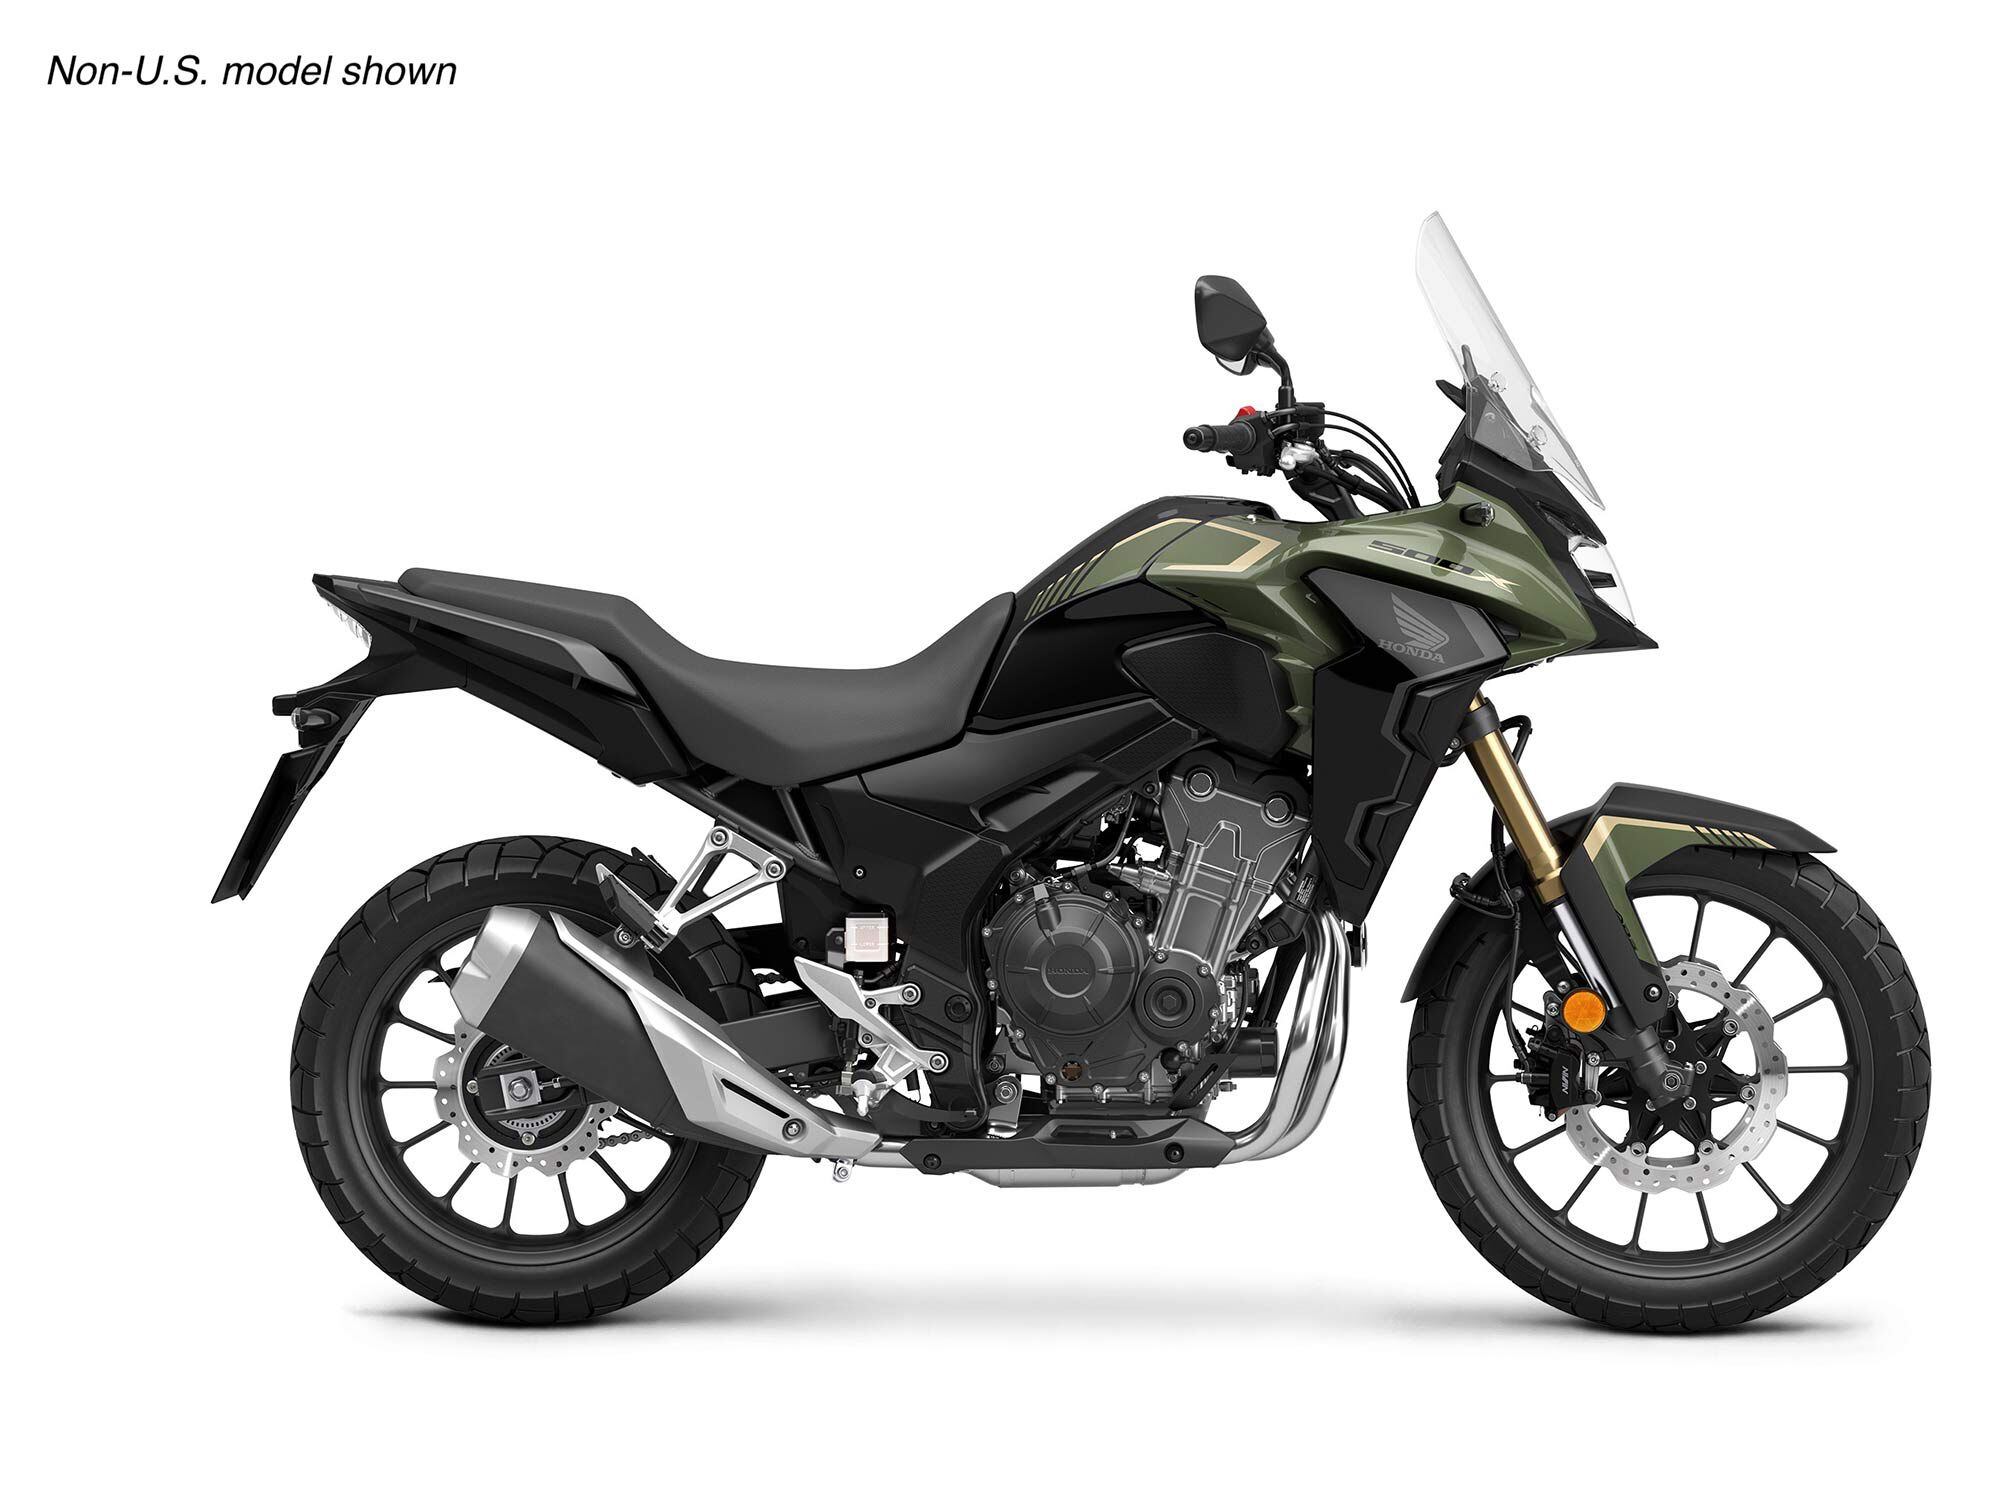 Honda’s 2023 CB500X is poised and ready to point its beak toward the urban sprawl or distant lands. It will be available this February for $7,299.